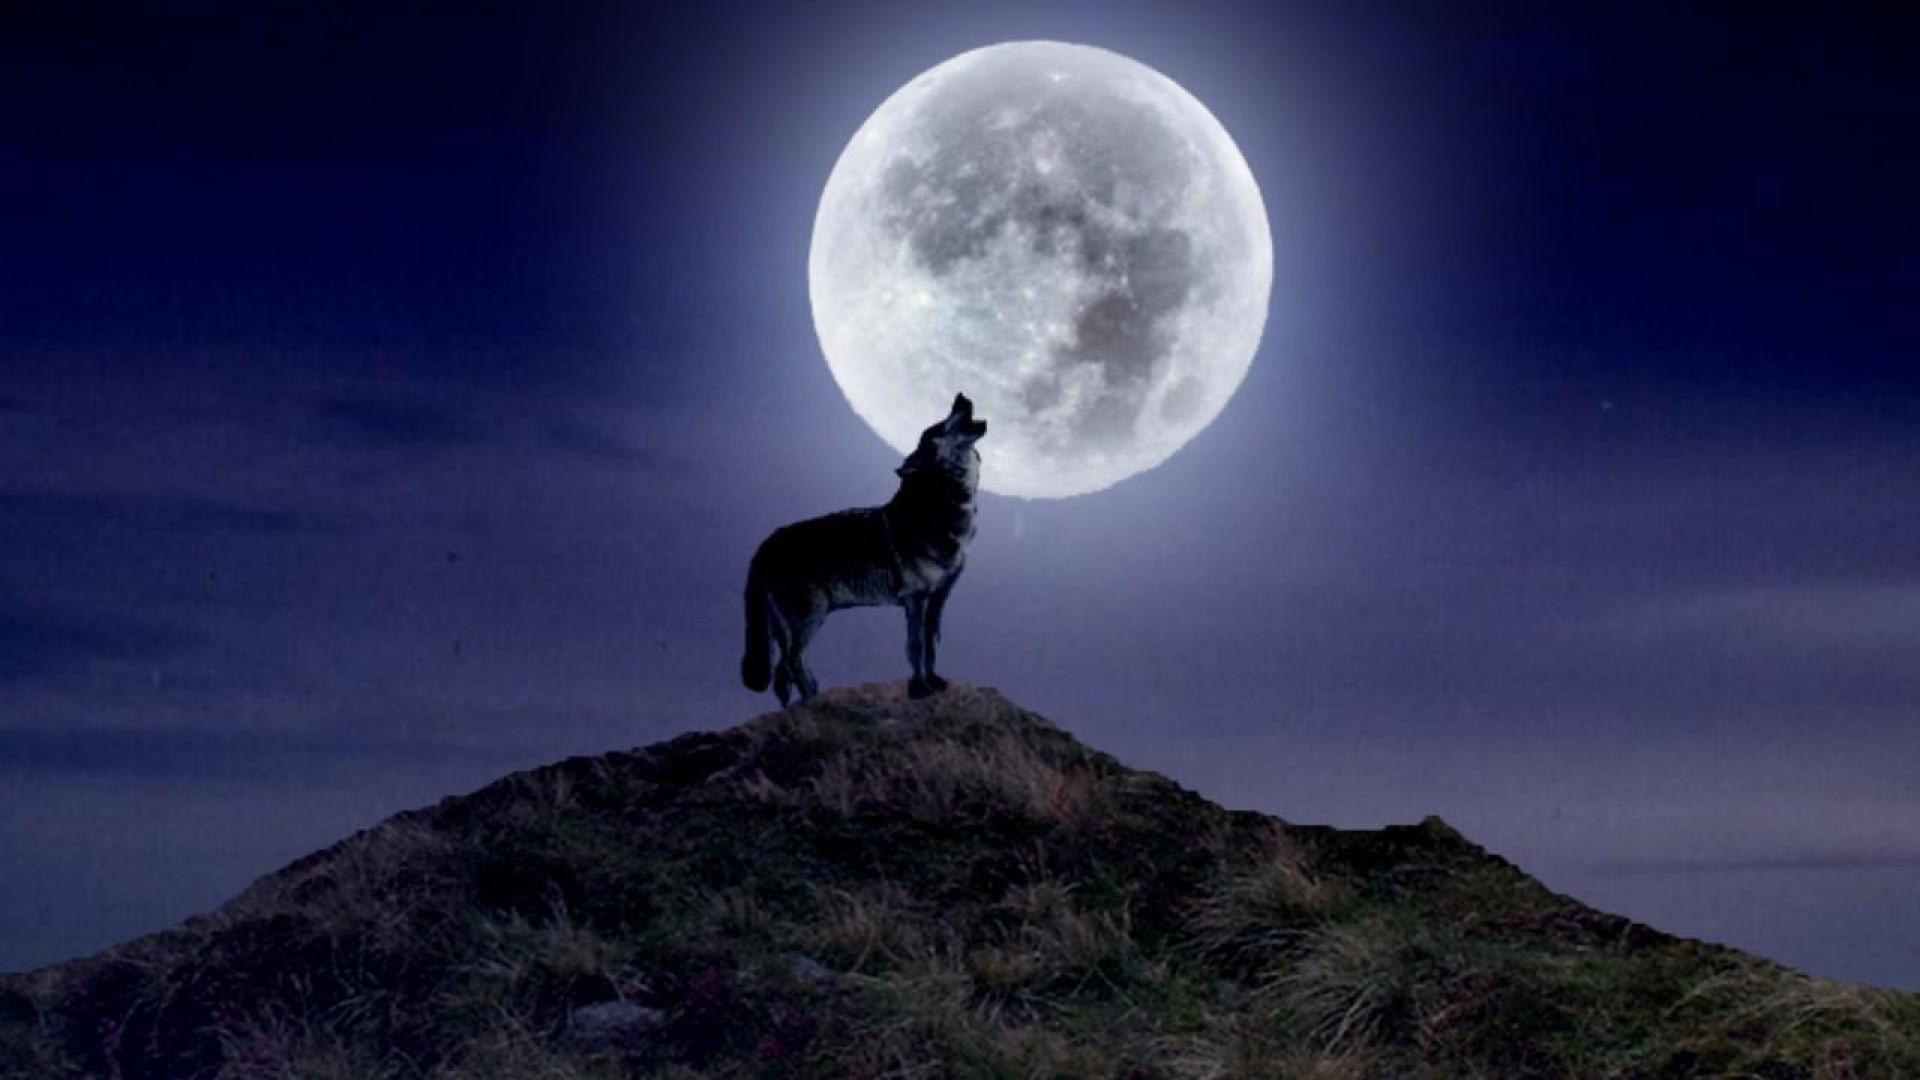 Wolf And Moon Wallpaper, image collections of wallpaper